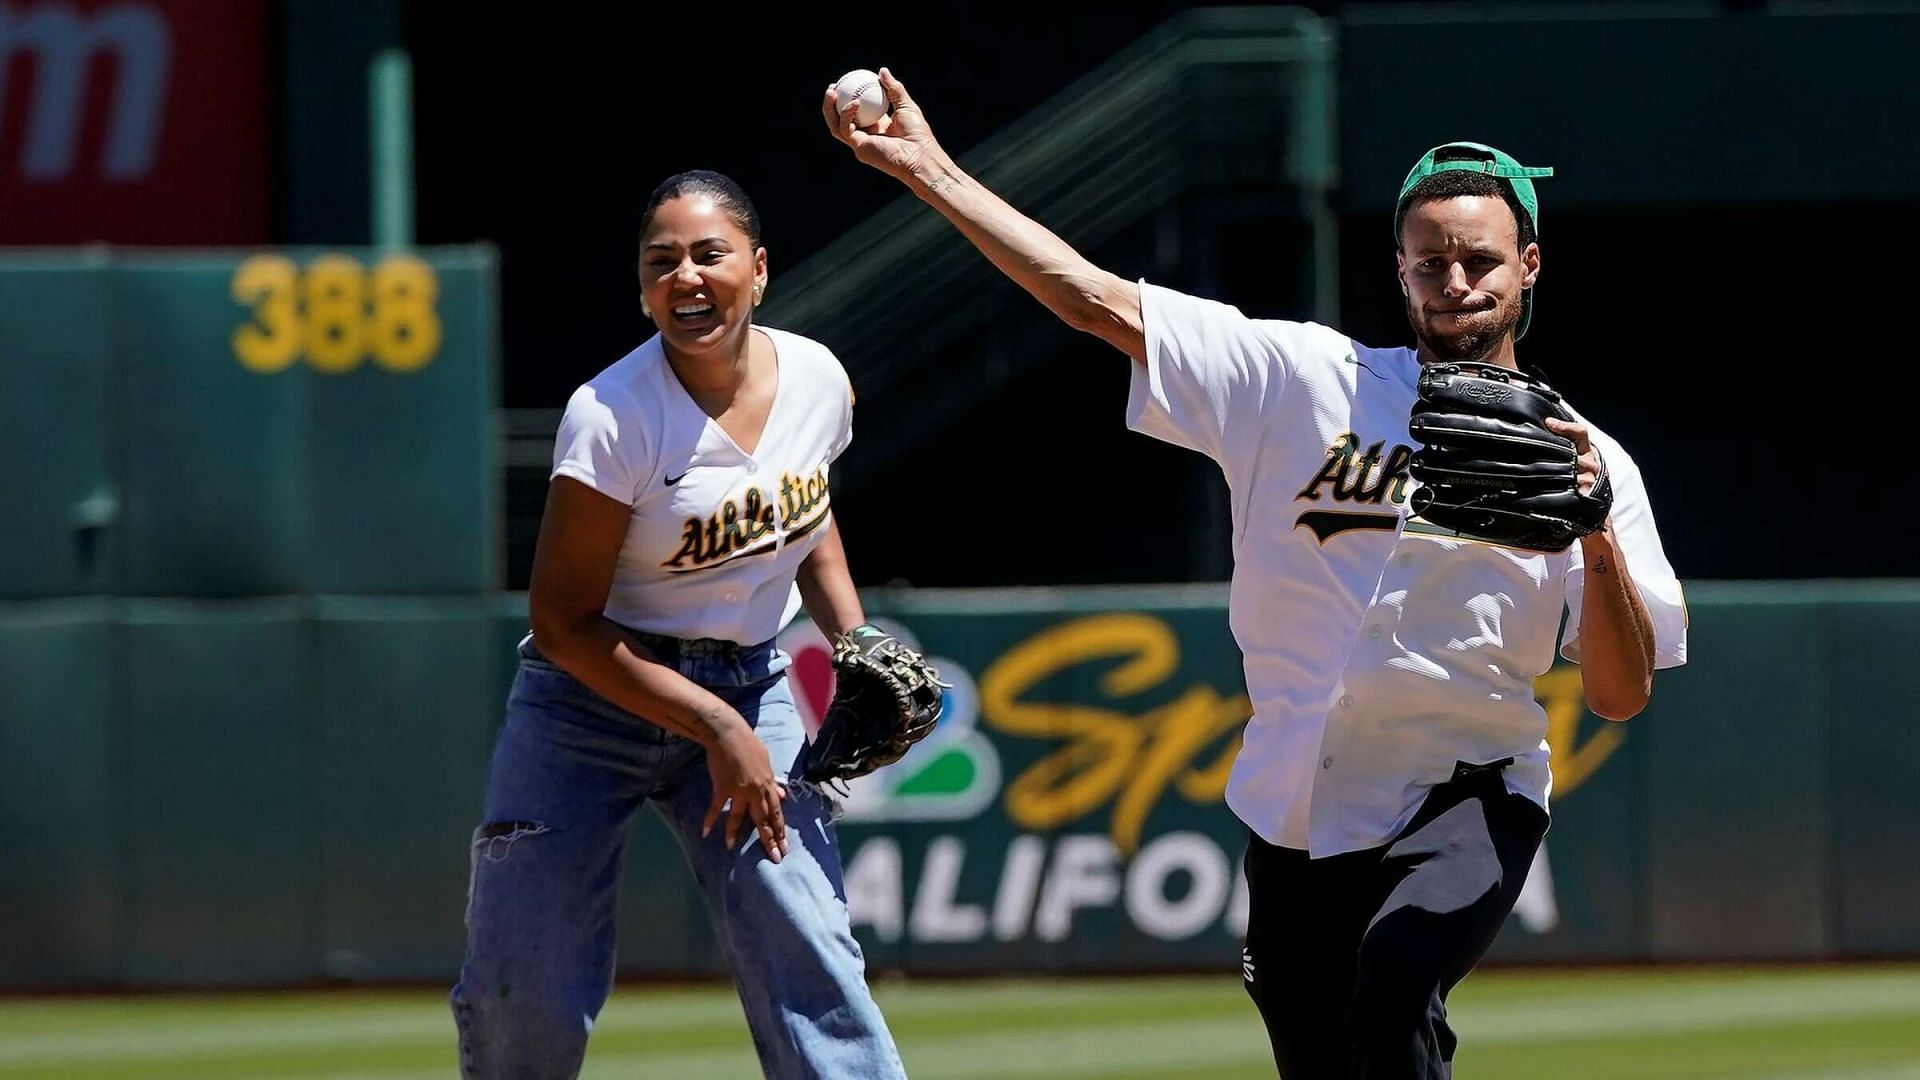 Steph Curry and his wife, Ayesha Curry, throw the first pitch at an Oakland Athletics game [Source: AP]